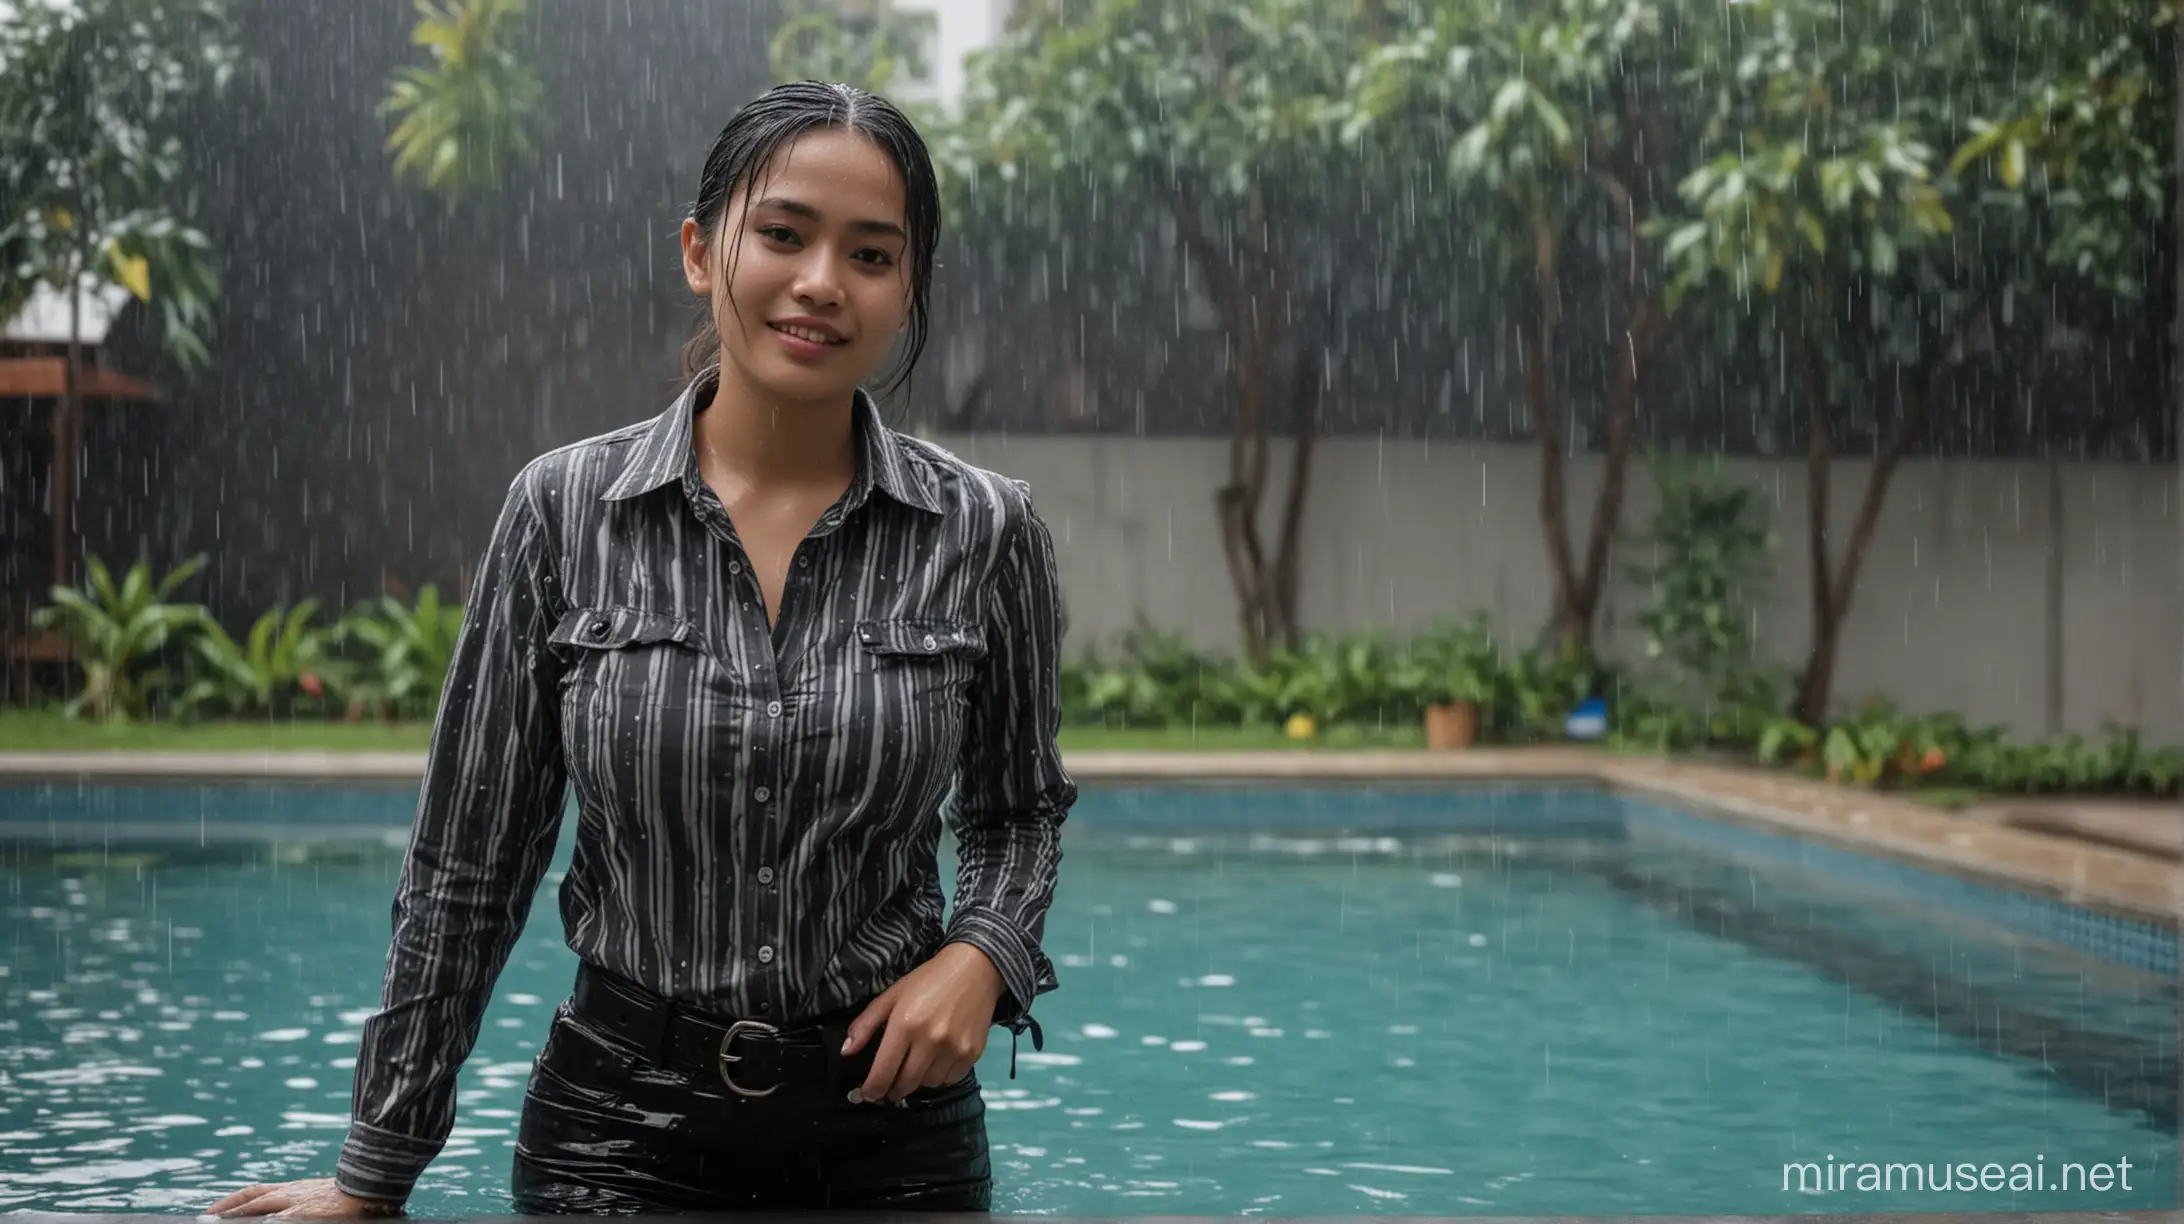 30 years old woman, indonesian, chubby, tight fit long sleeves buttoned black-grey stripes shirt, black long pants with belt, heavy downpour rain, in the swimming pool, dripping wet, poolside, smirk, night, low light, close-up